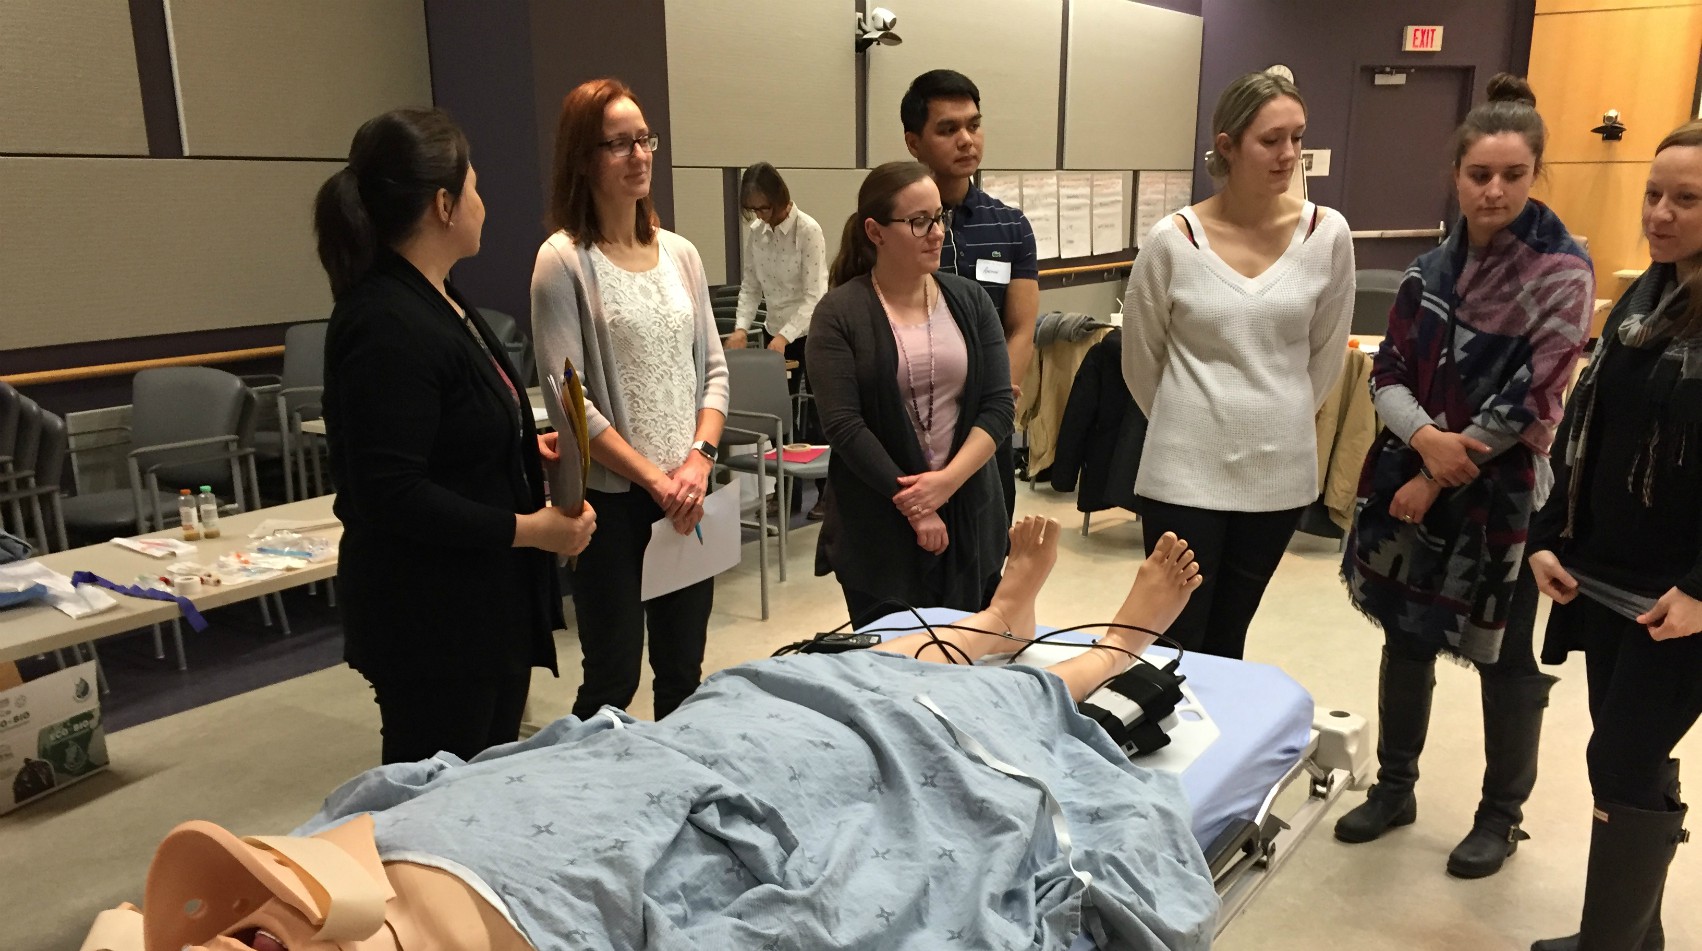 Health care staff listen to a leader teaching a lesson over a simulation mannequin